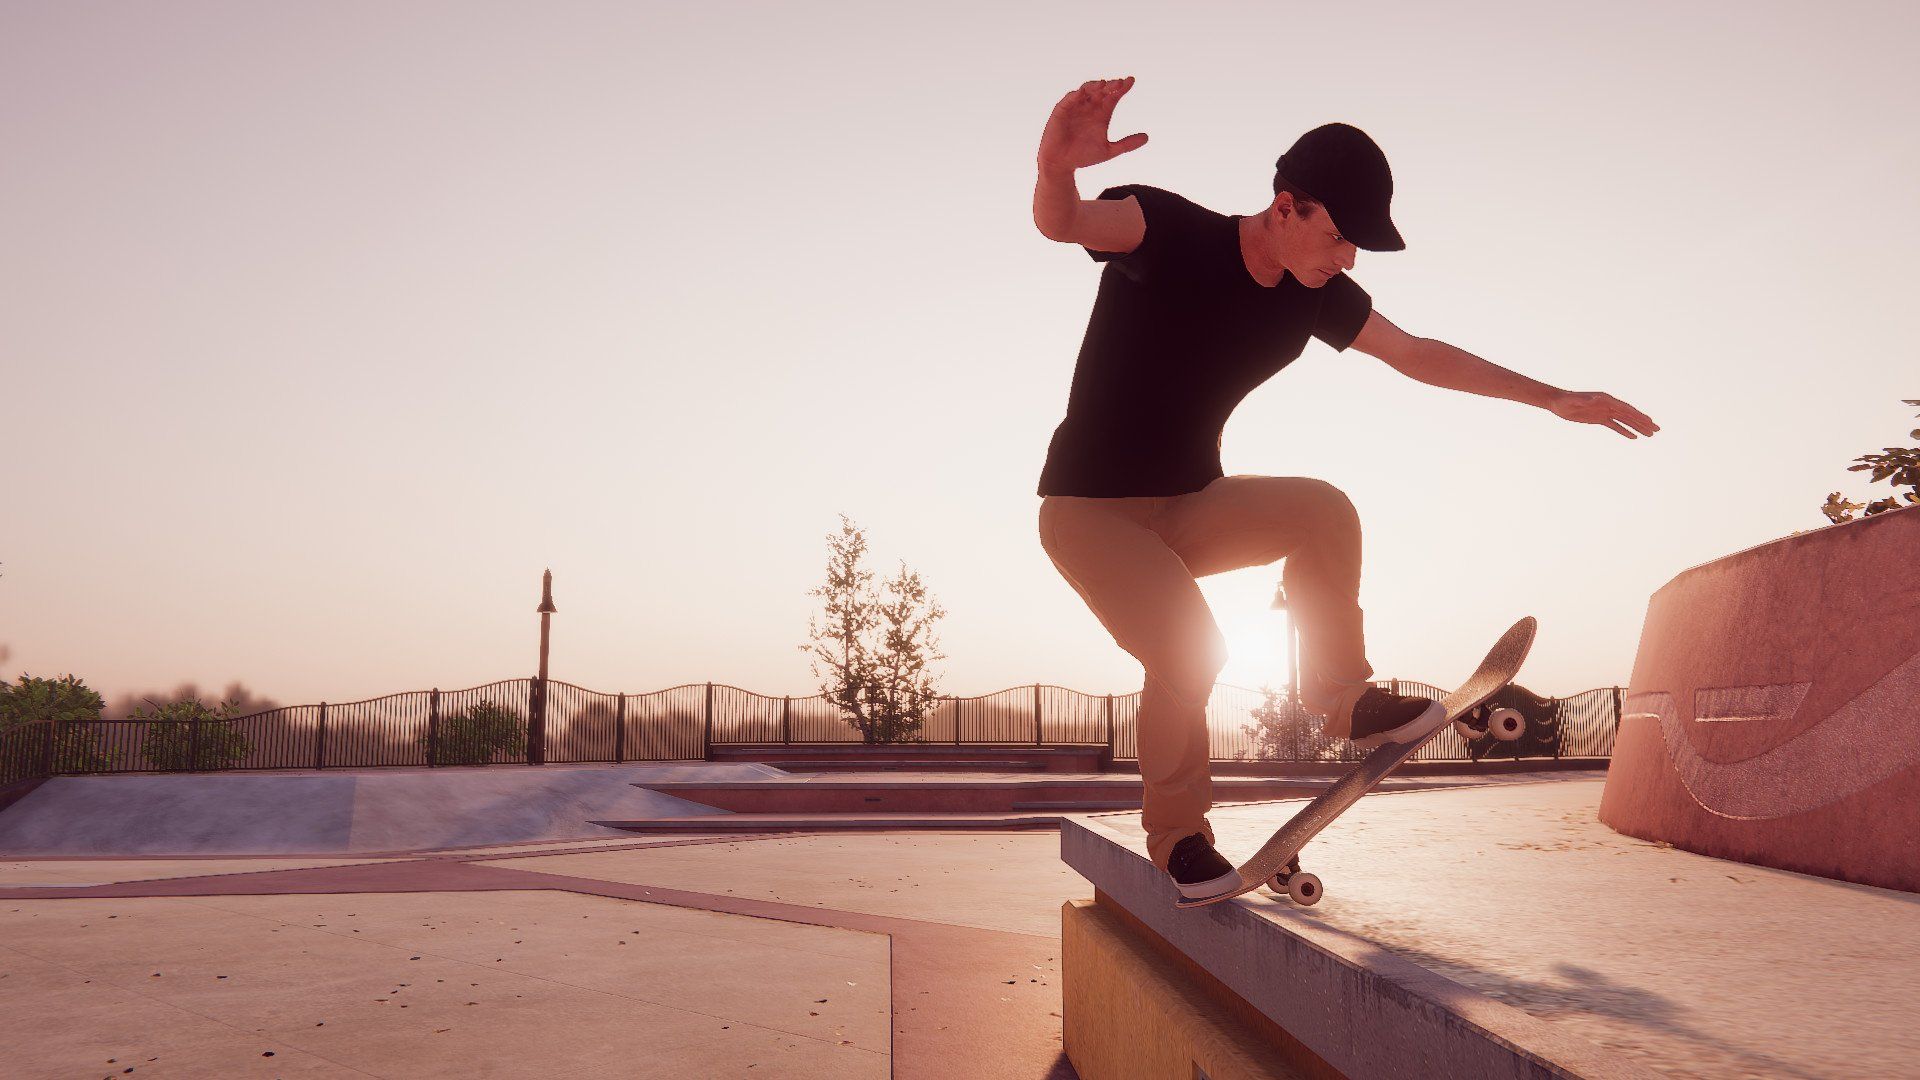 Skater XL Is a Realistic Skateboarding Game That'll Pop Shuvit